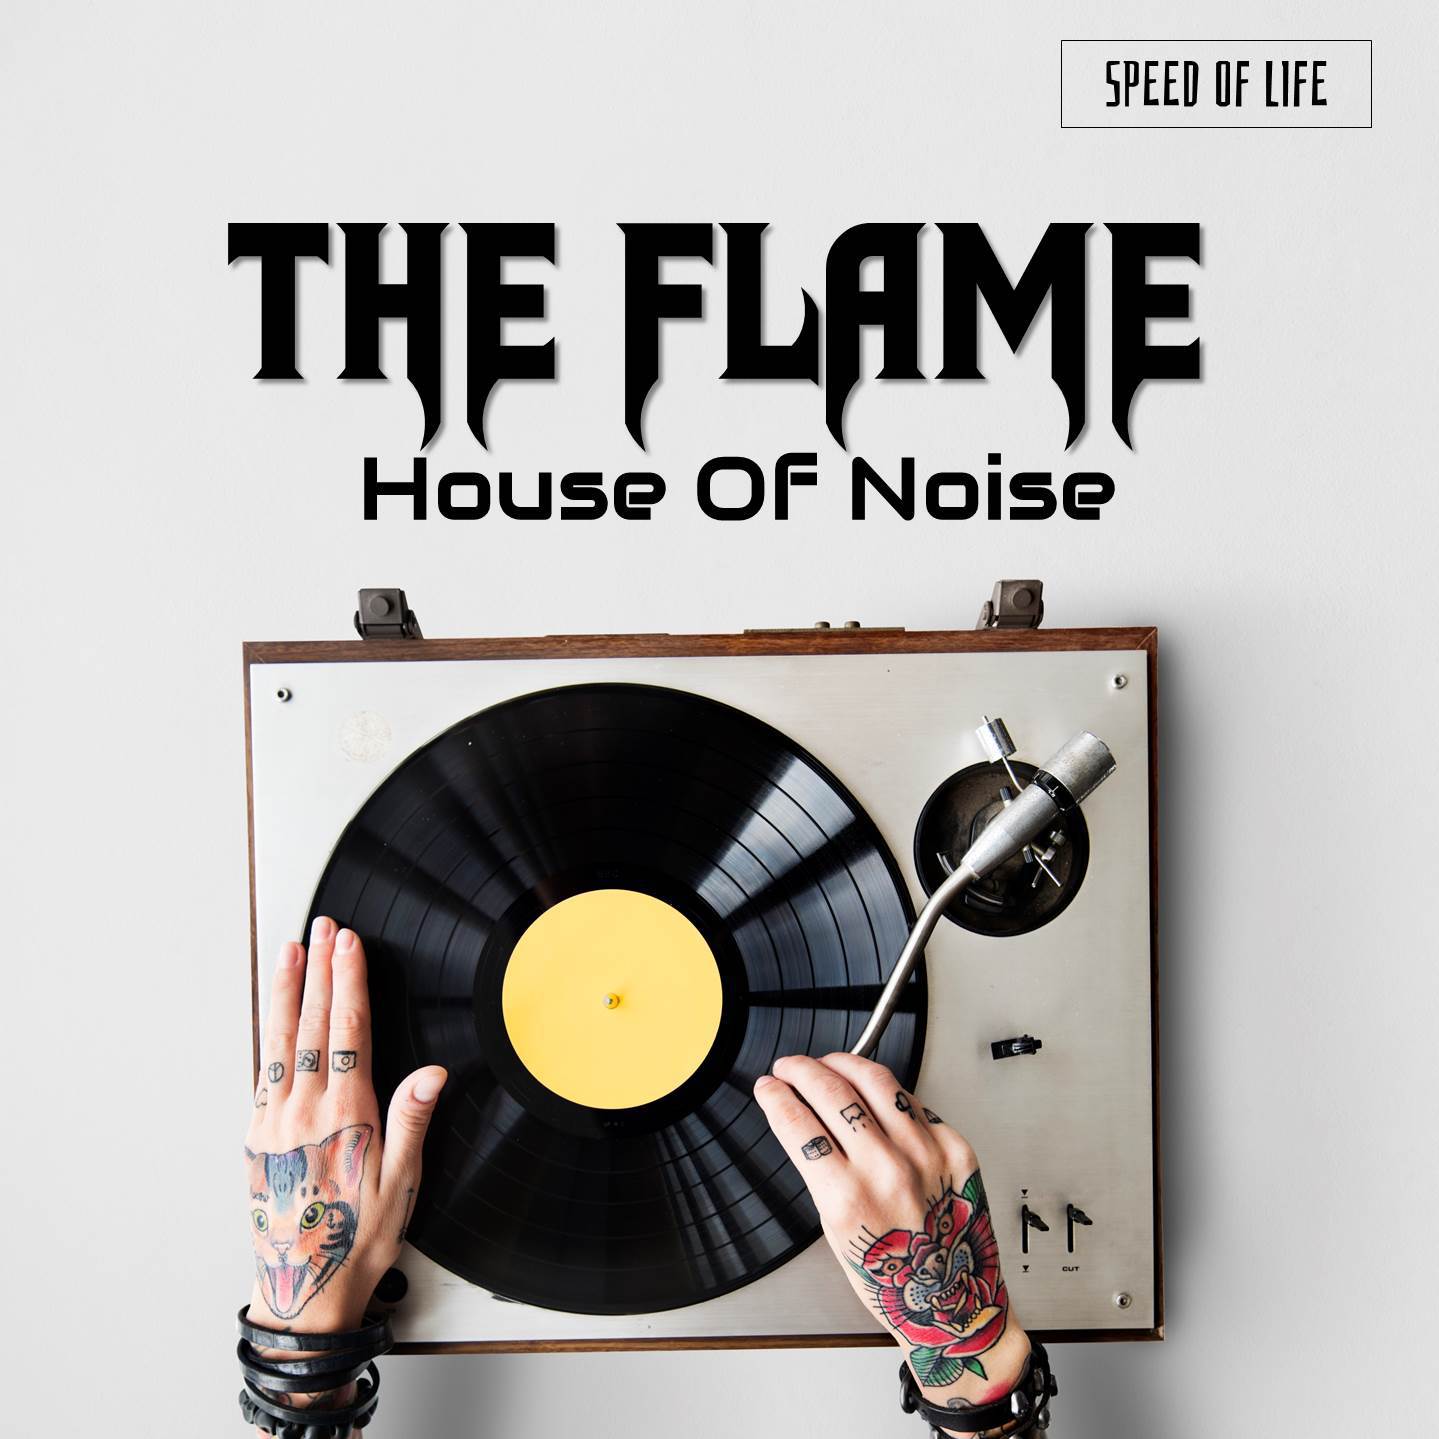 House Of Noise - The Flame (Dj Global Byte Mix)